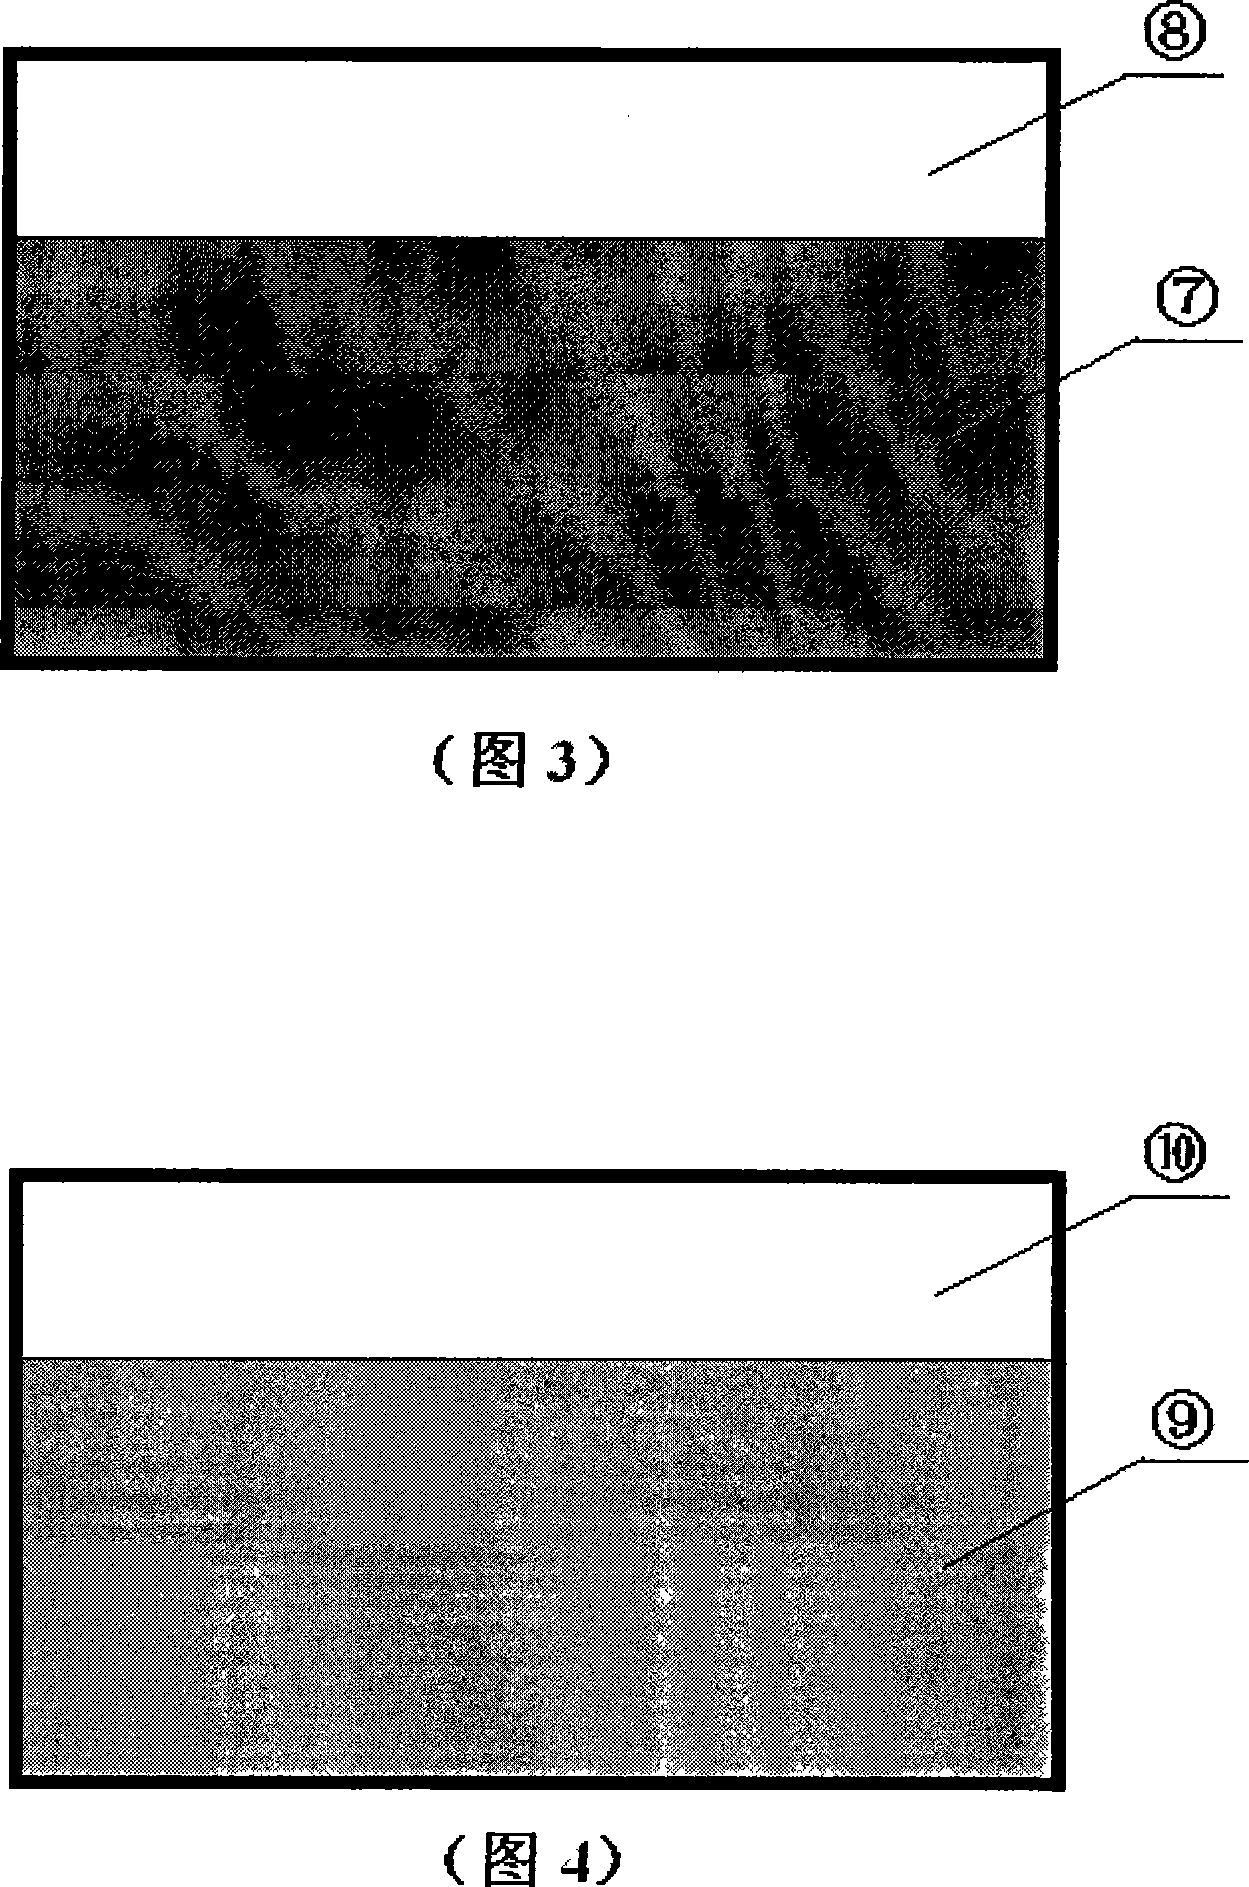 Desalinization and purification method for sea water or sewage